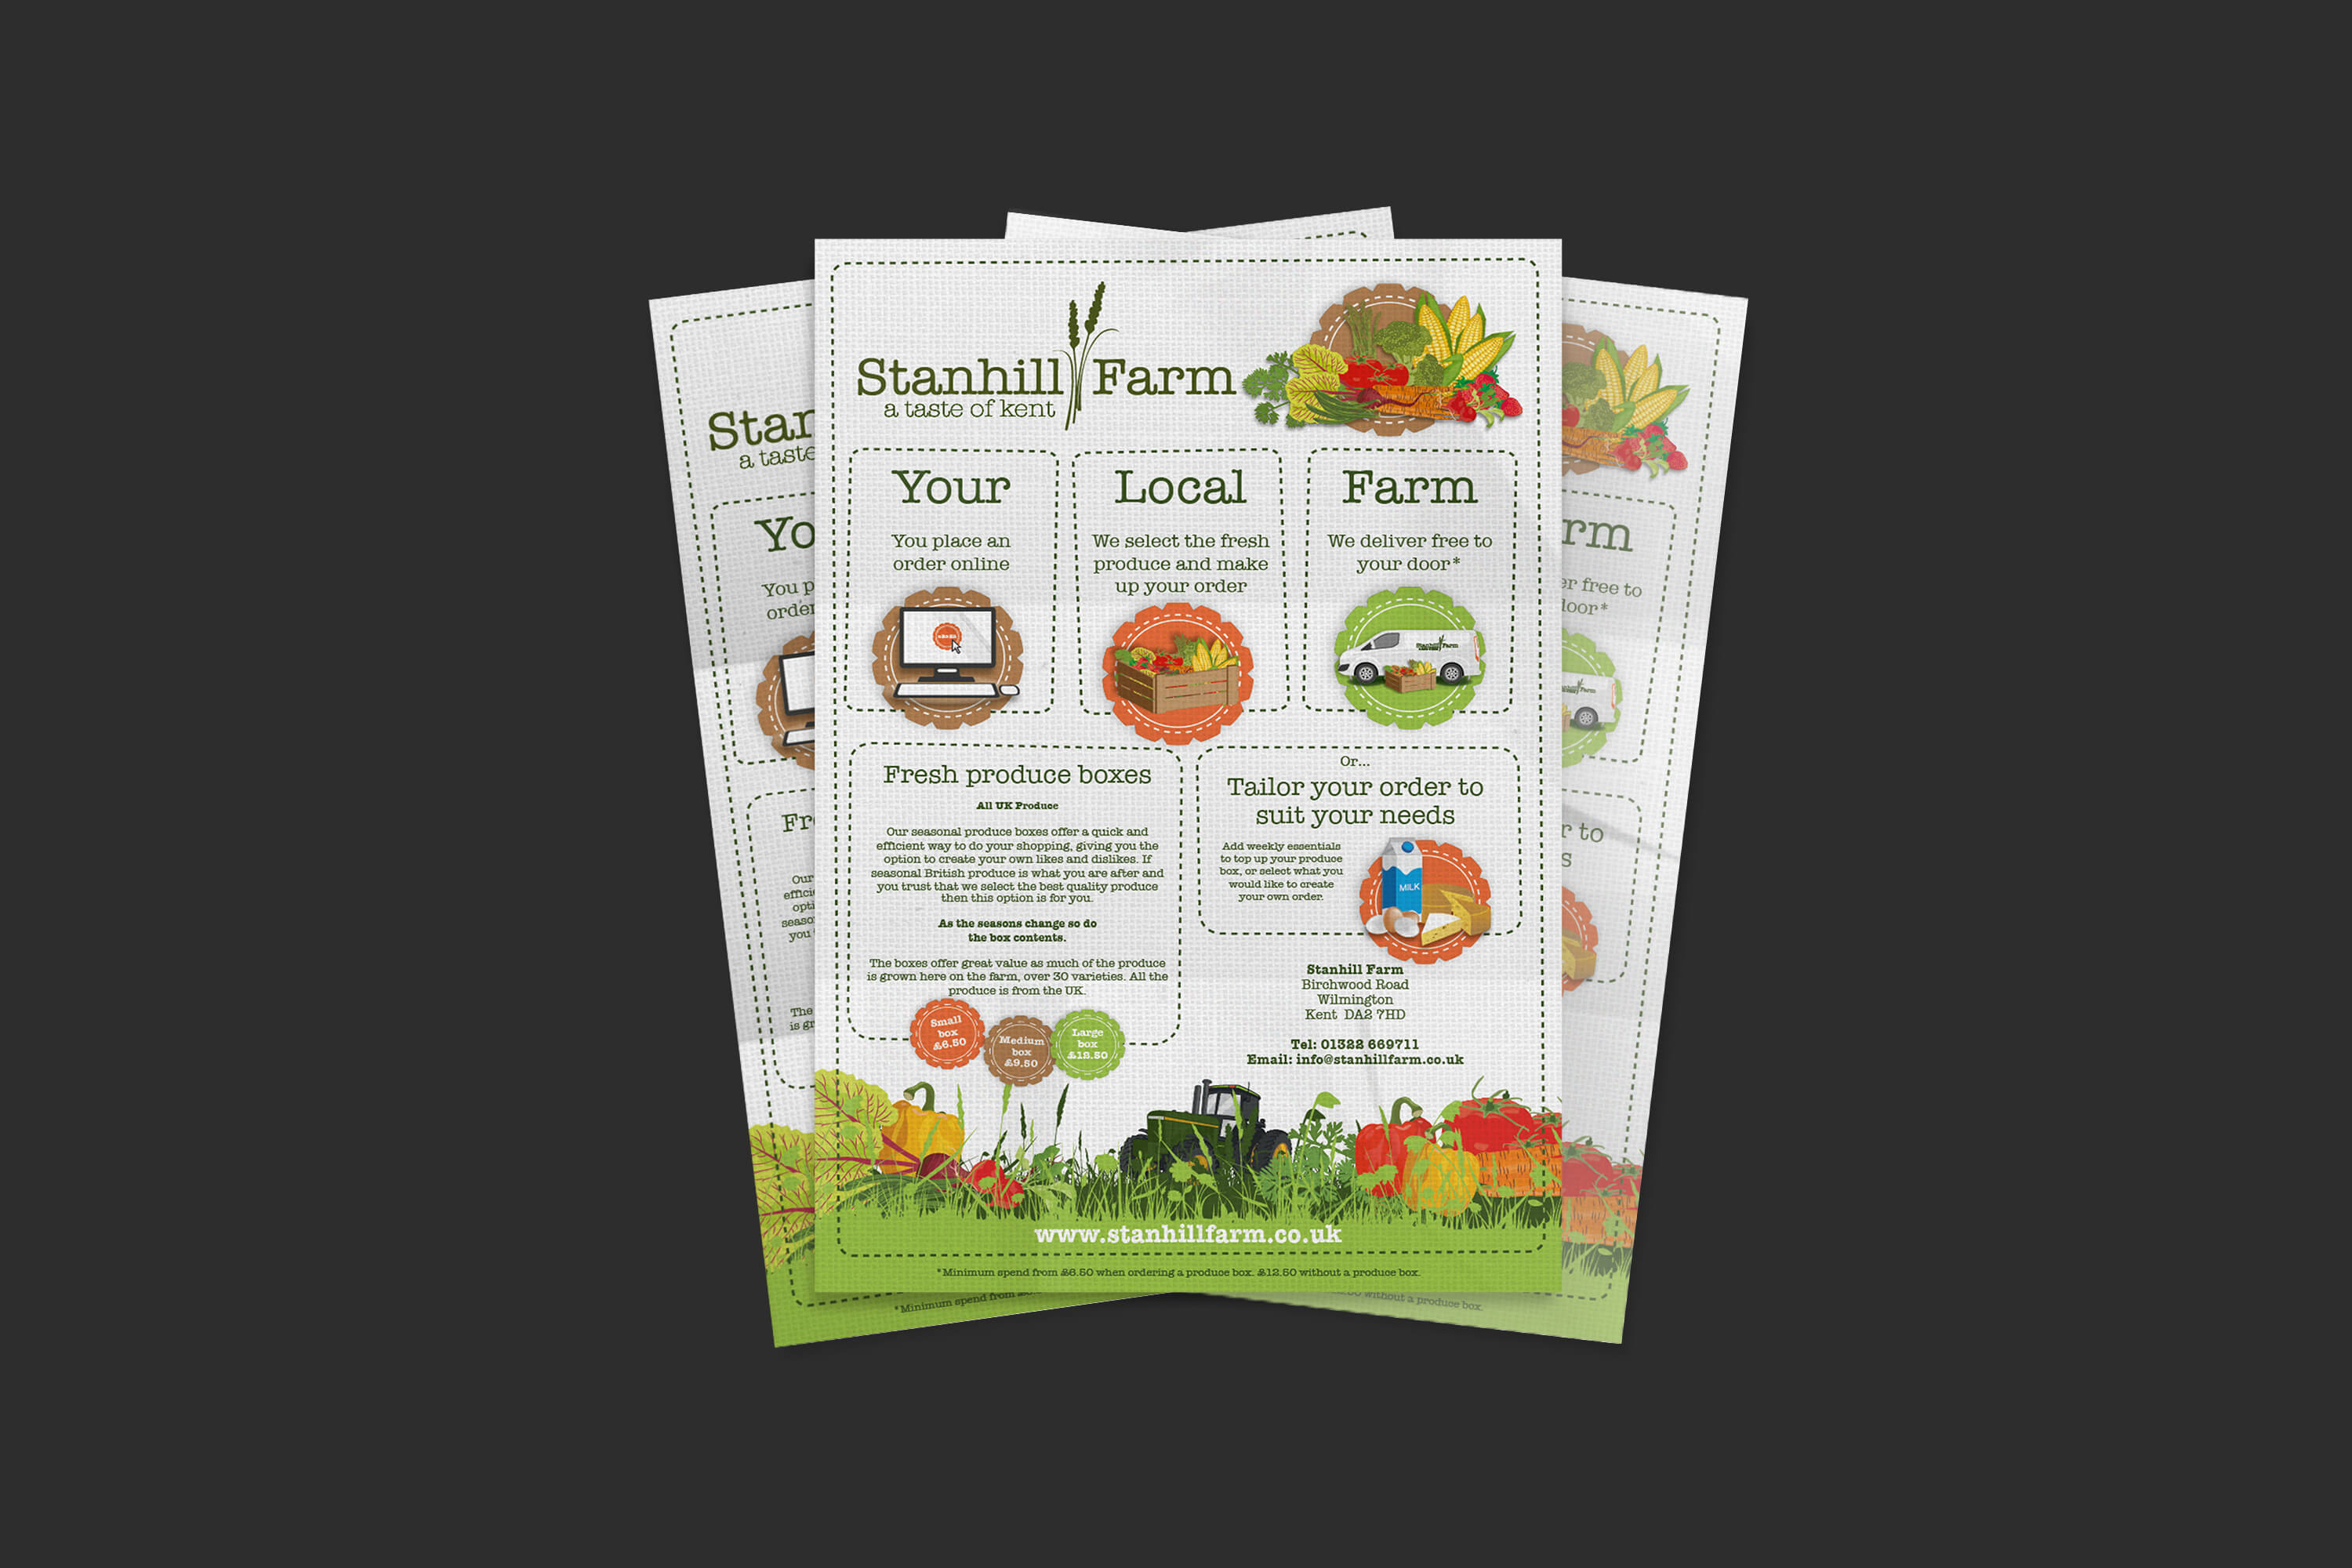 A group of Stanhill Farm advertising flyers